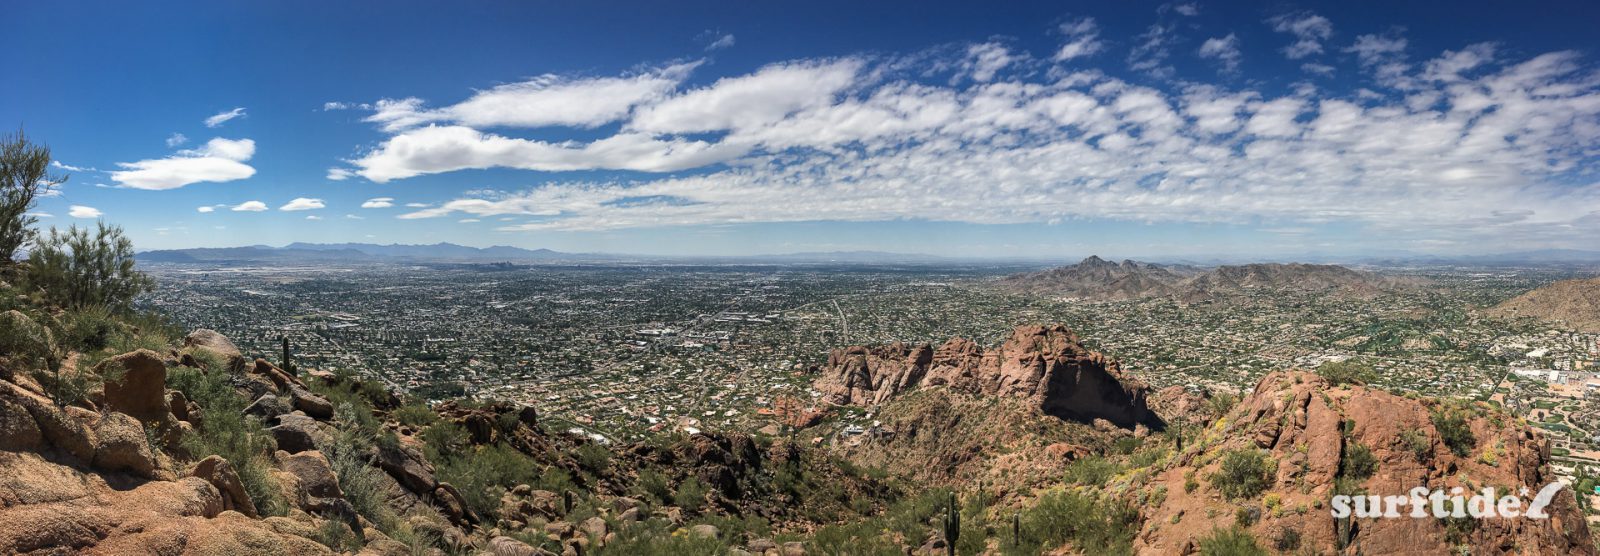 Panoramic view of the surrounding arid landscape from the top of Camelback Mountain, Arizona, USA